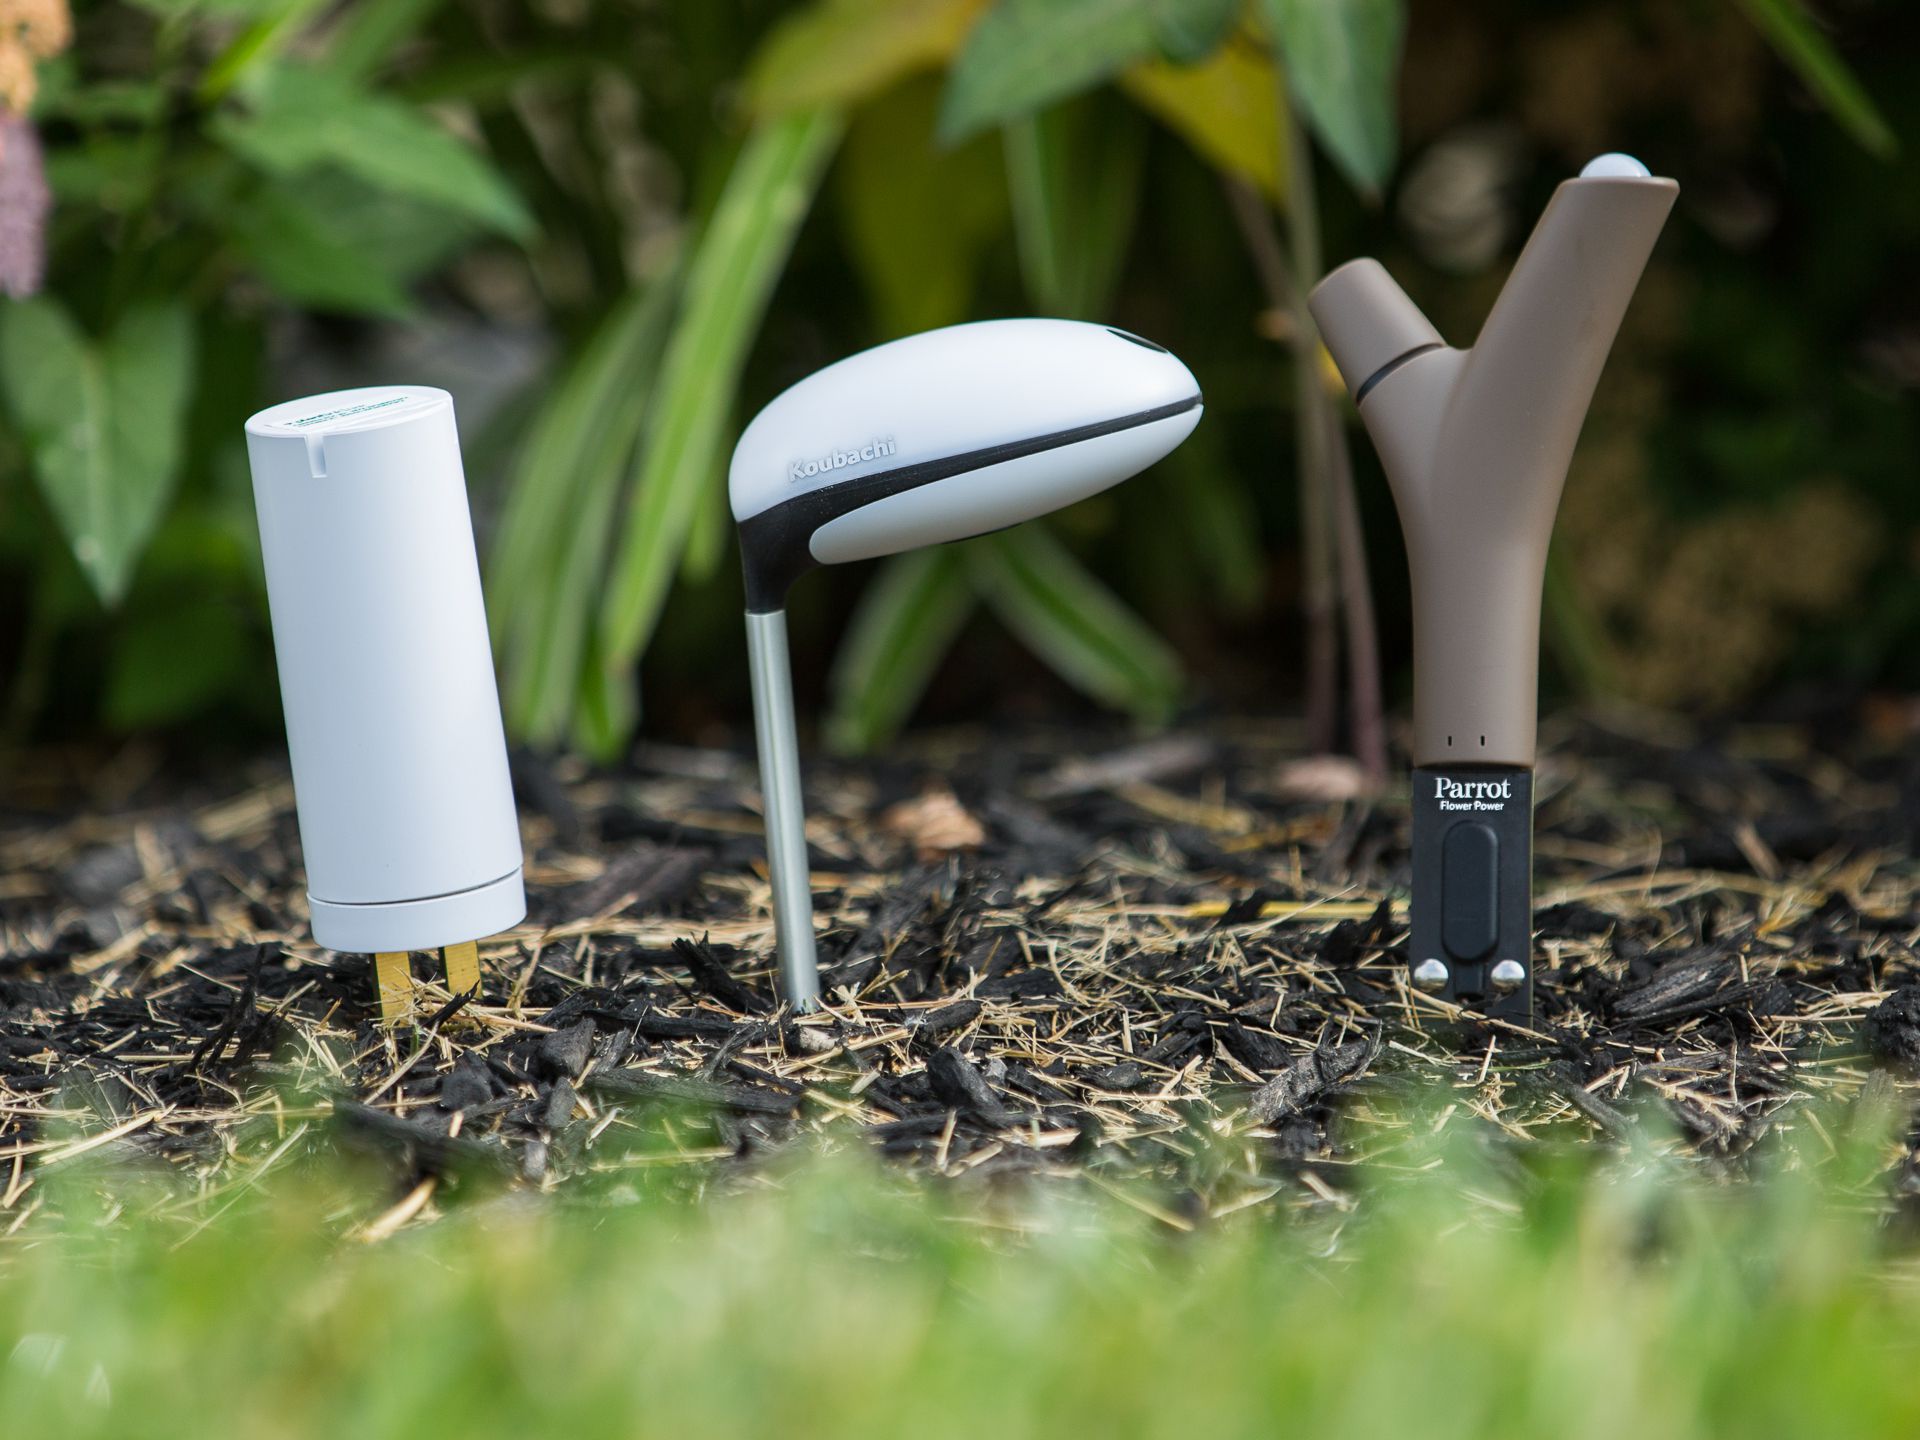 Three plant sensors want to be your garden assistant - CNET